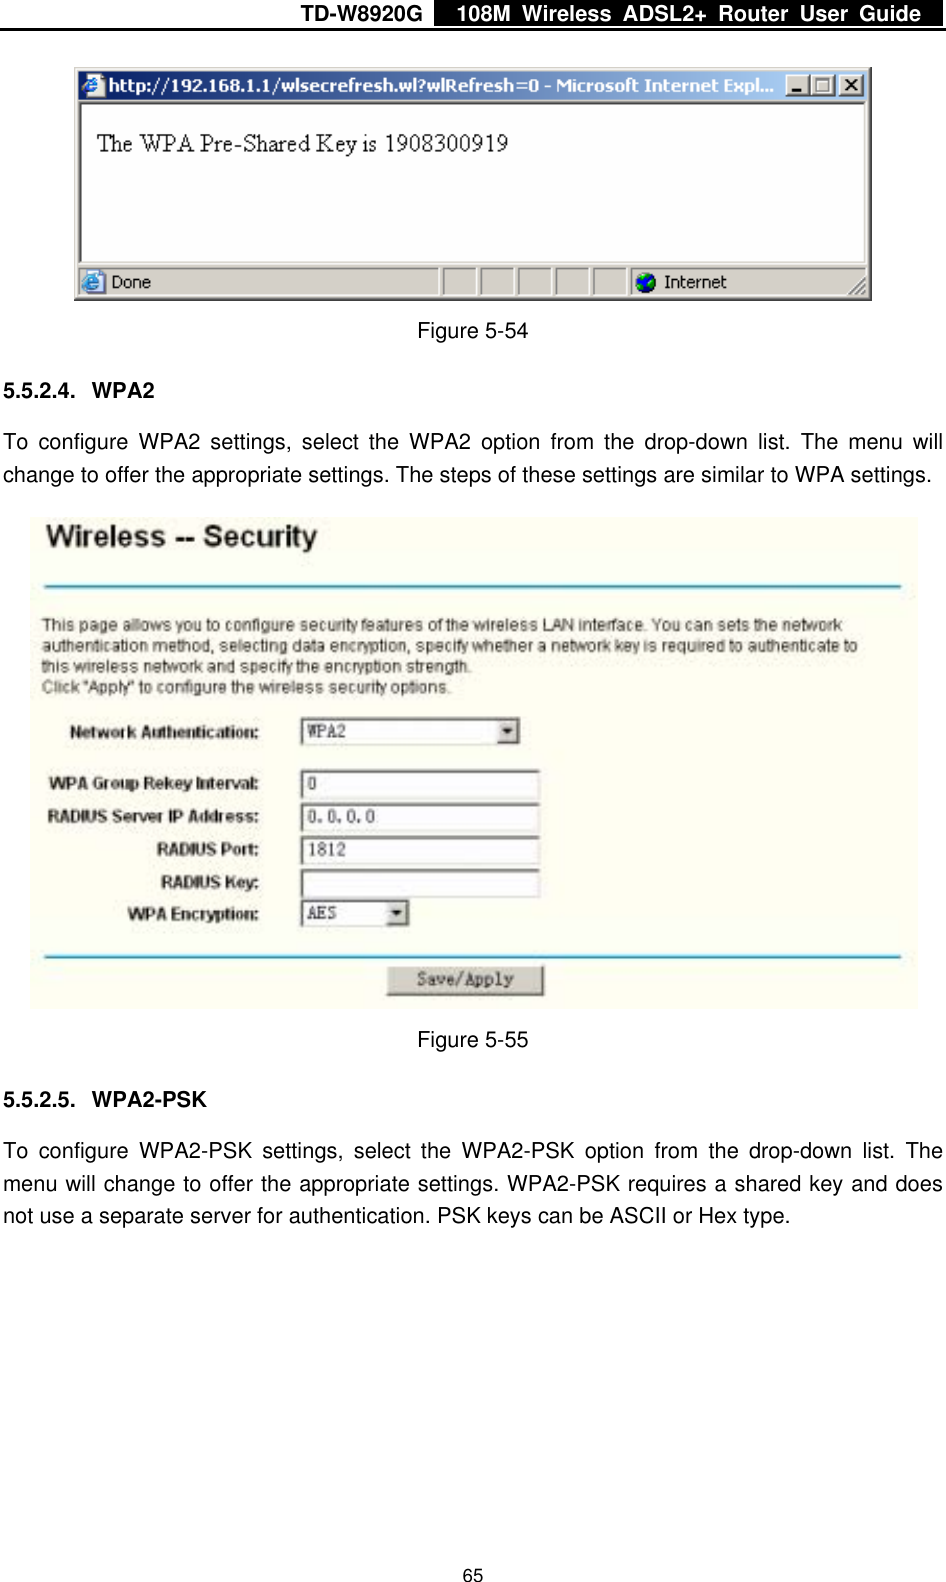 TD-W8920G    108M Wireless ADSL2+ Router User Guide    65 Figure 5-54 5.5.2.4. WPA2 To configure WPA2 settings, select the WPA2 option from the drop-down list. The menu will change to offer the appropriate settings. The steps of these settings are similar to WPA settings.  Figure 5-55 5.5.2.5. WPA2-PSK To configure WPA2-PSK settings, select the WPA2-PSK option from the drop-down list. The menu will change to offer the appropriate settings. WPA2-PSK requires a shared key and does not use a separate server for authentication. PSK keys can be ASCII or Hex type. 